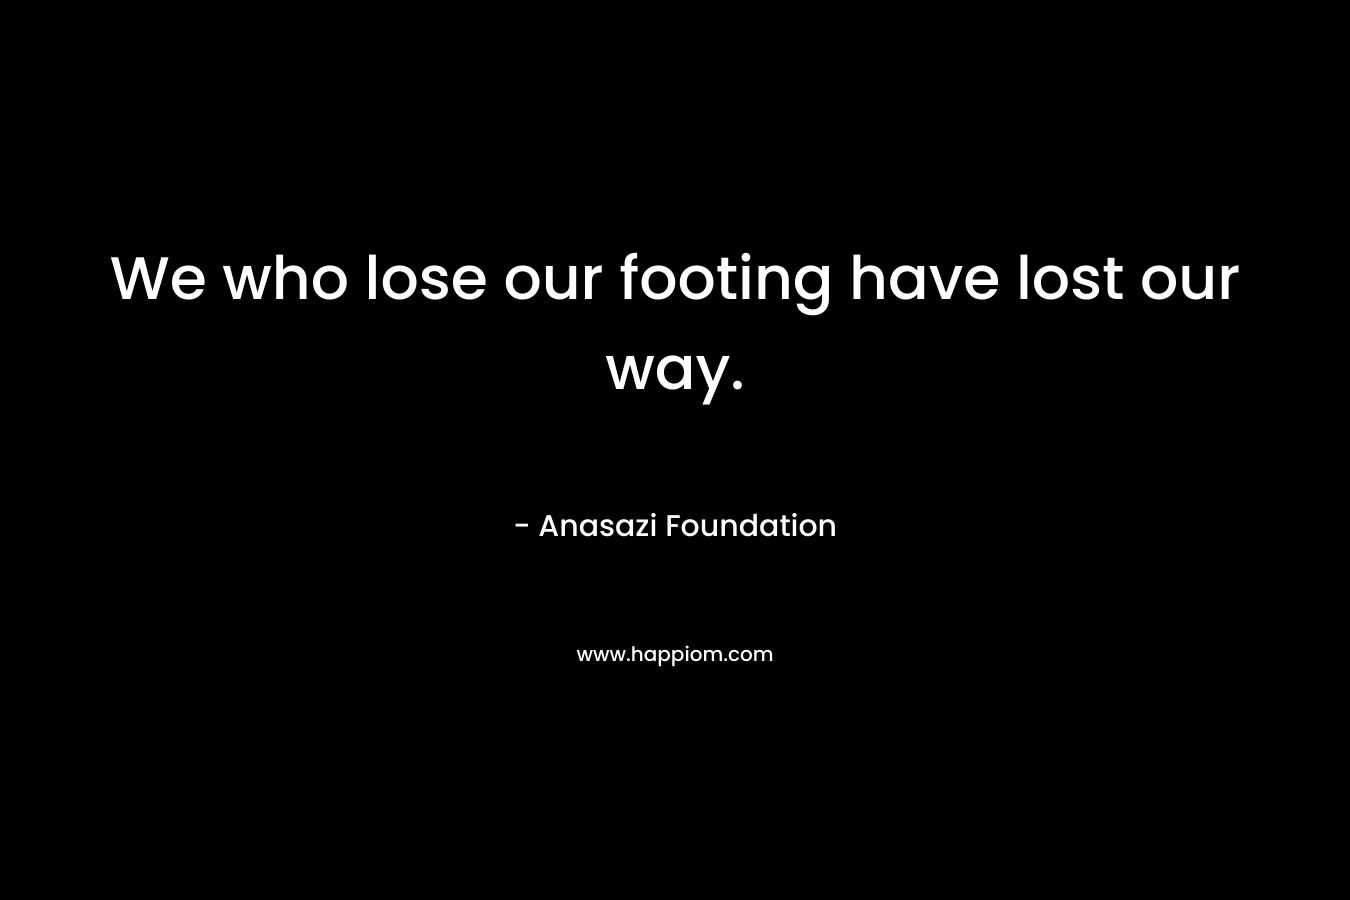 We who lose our footing have lost our way.